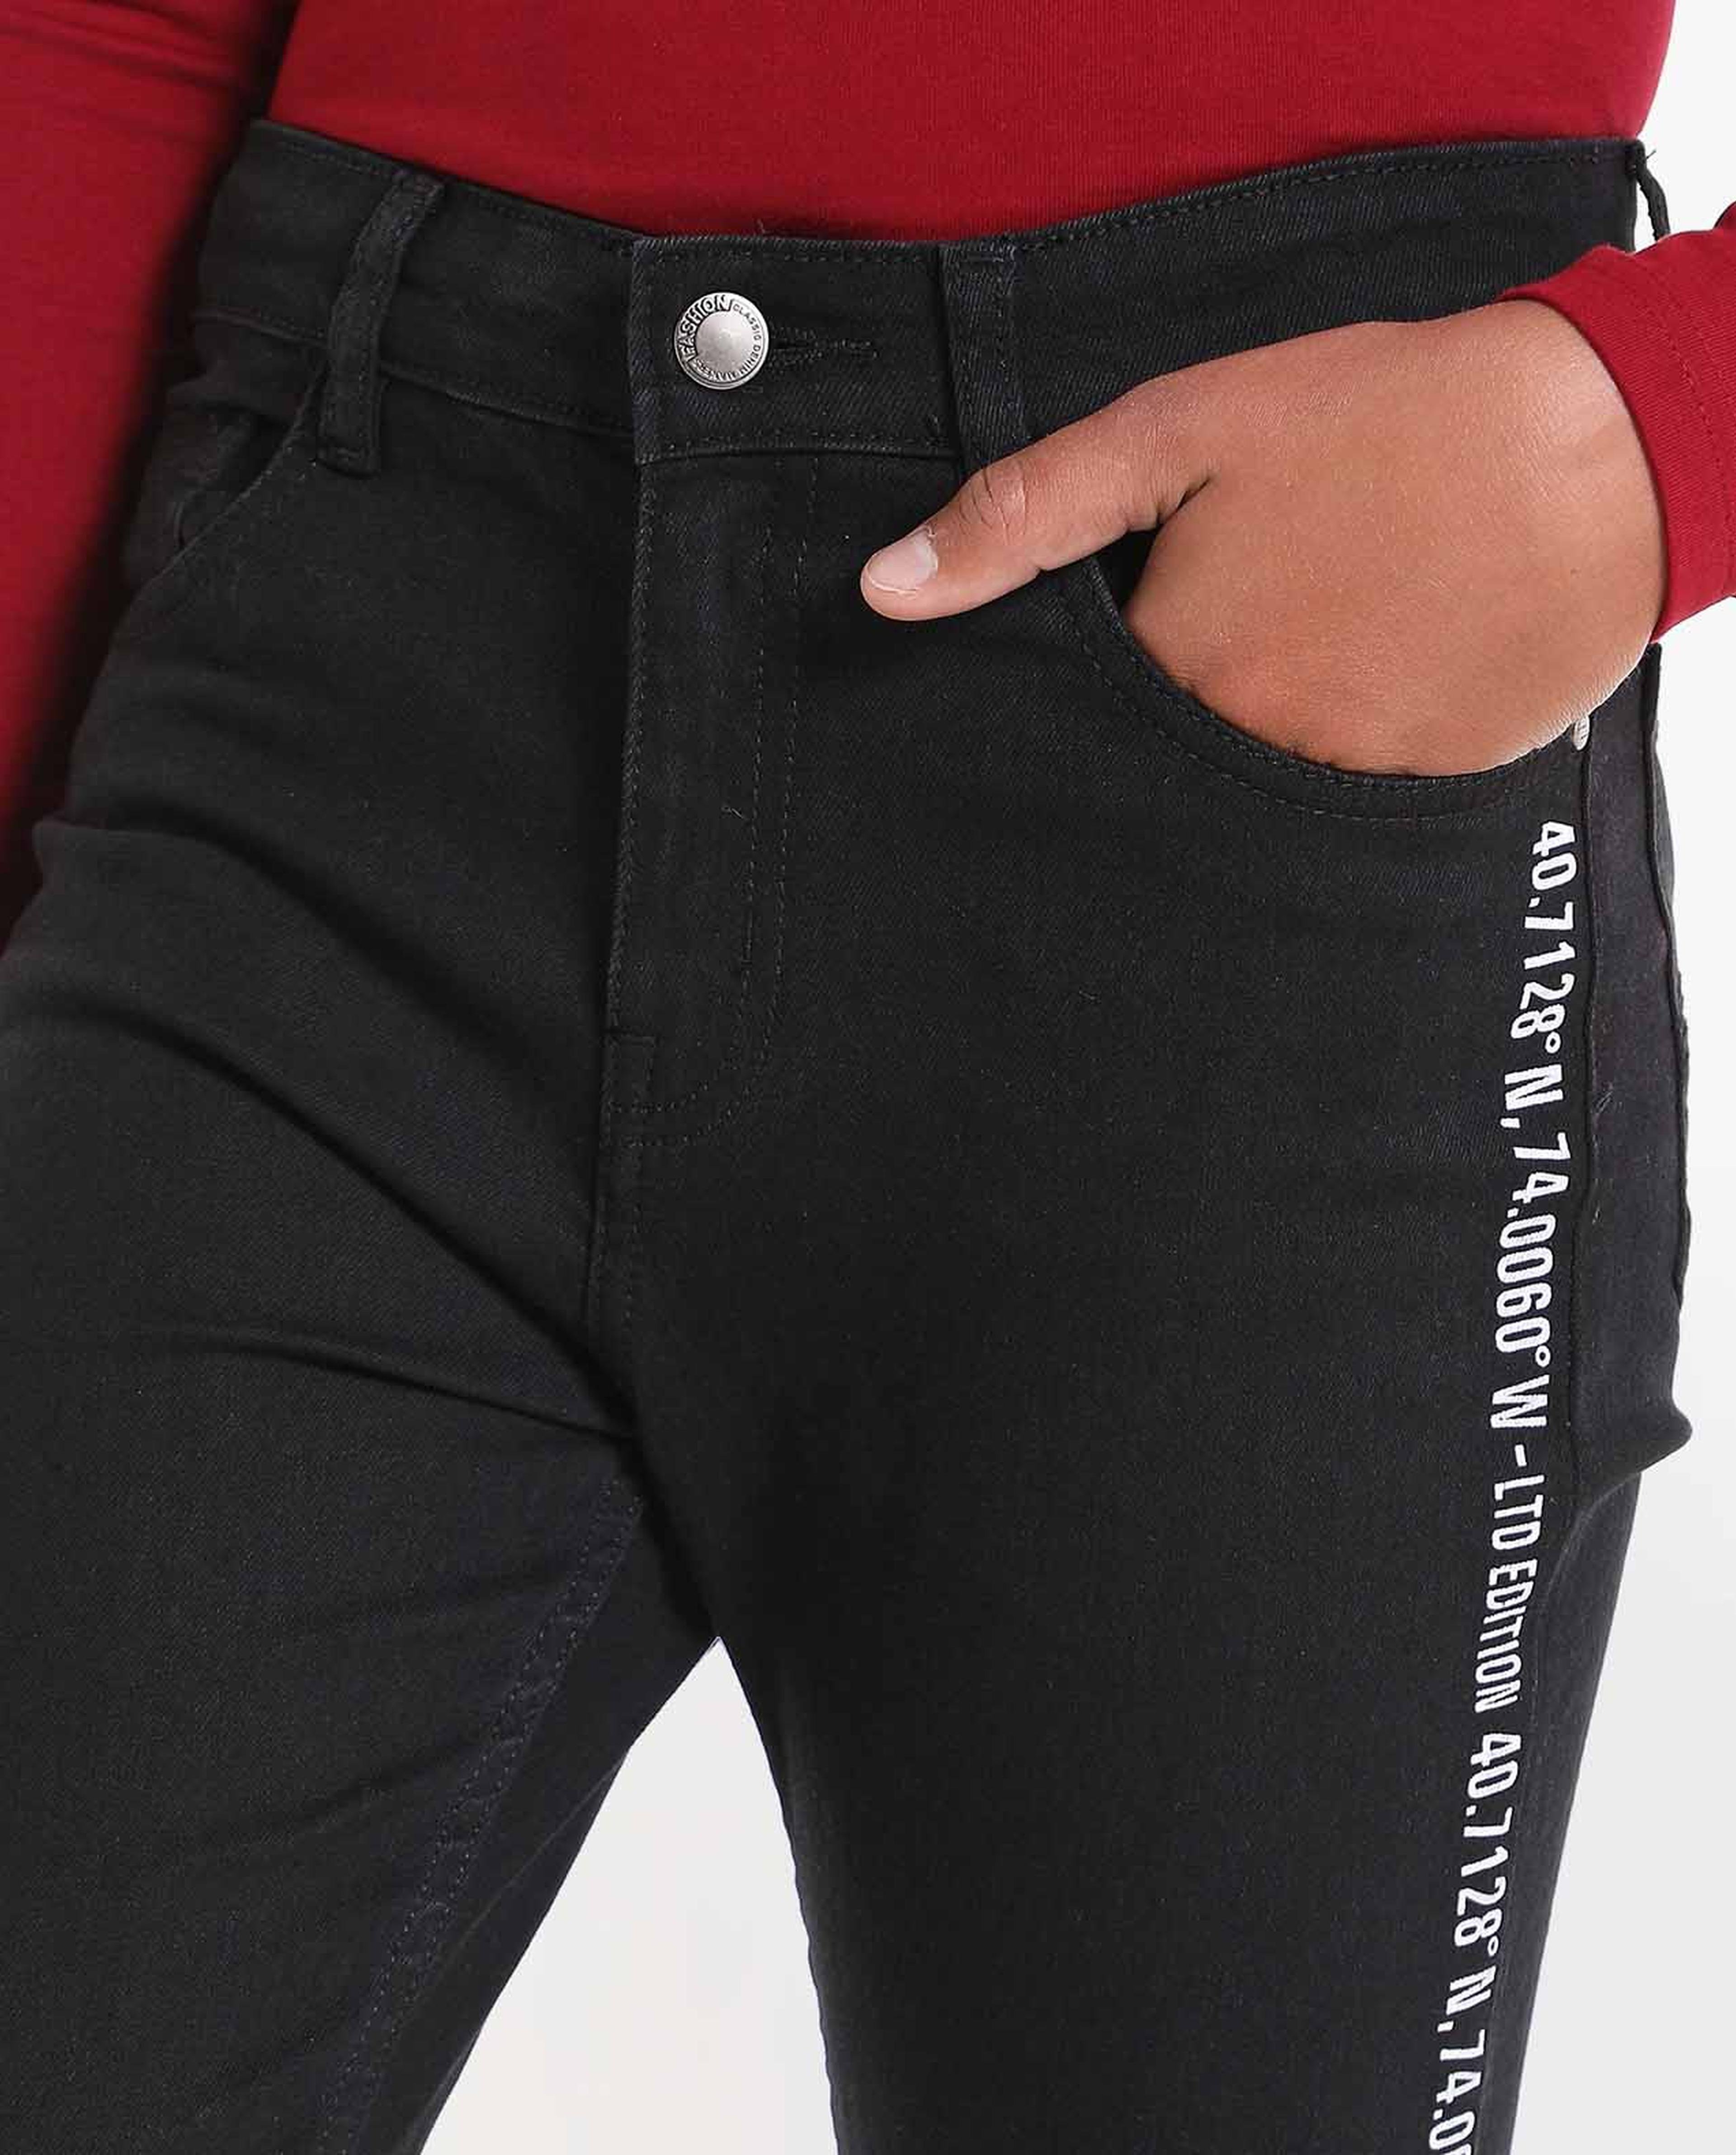 Typography Printed Jeans with Button Closure